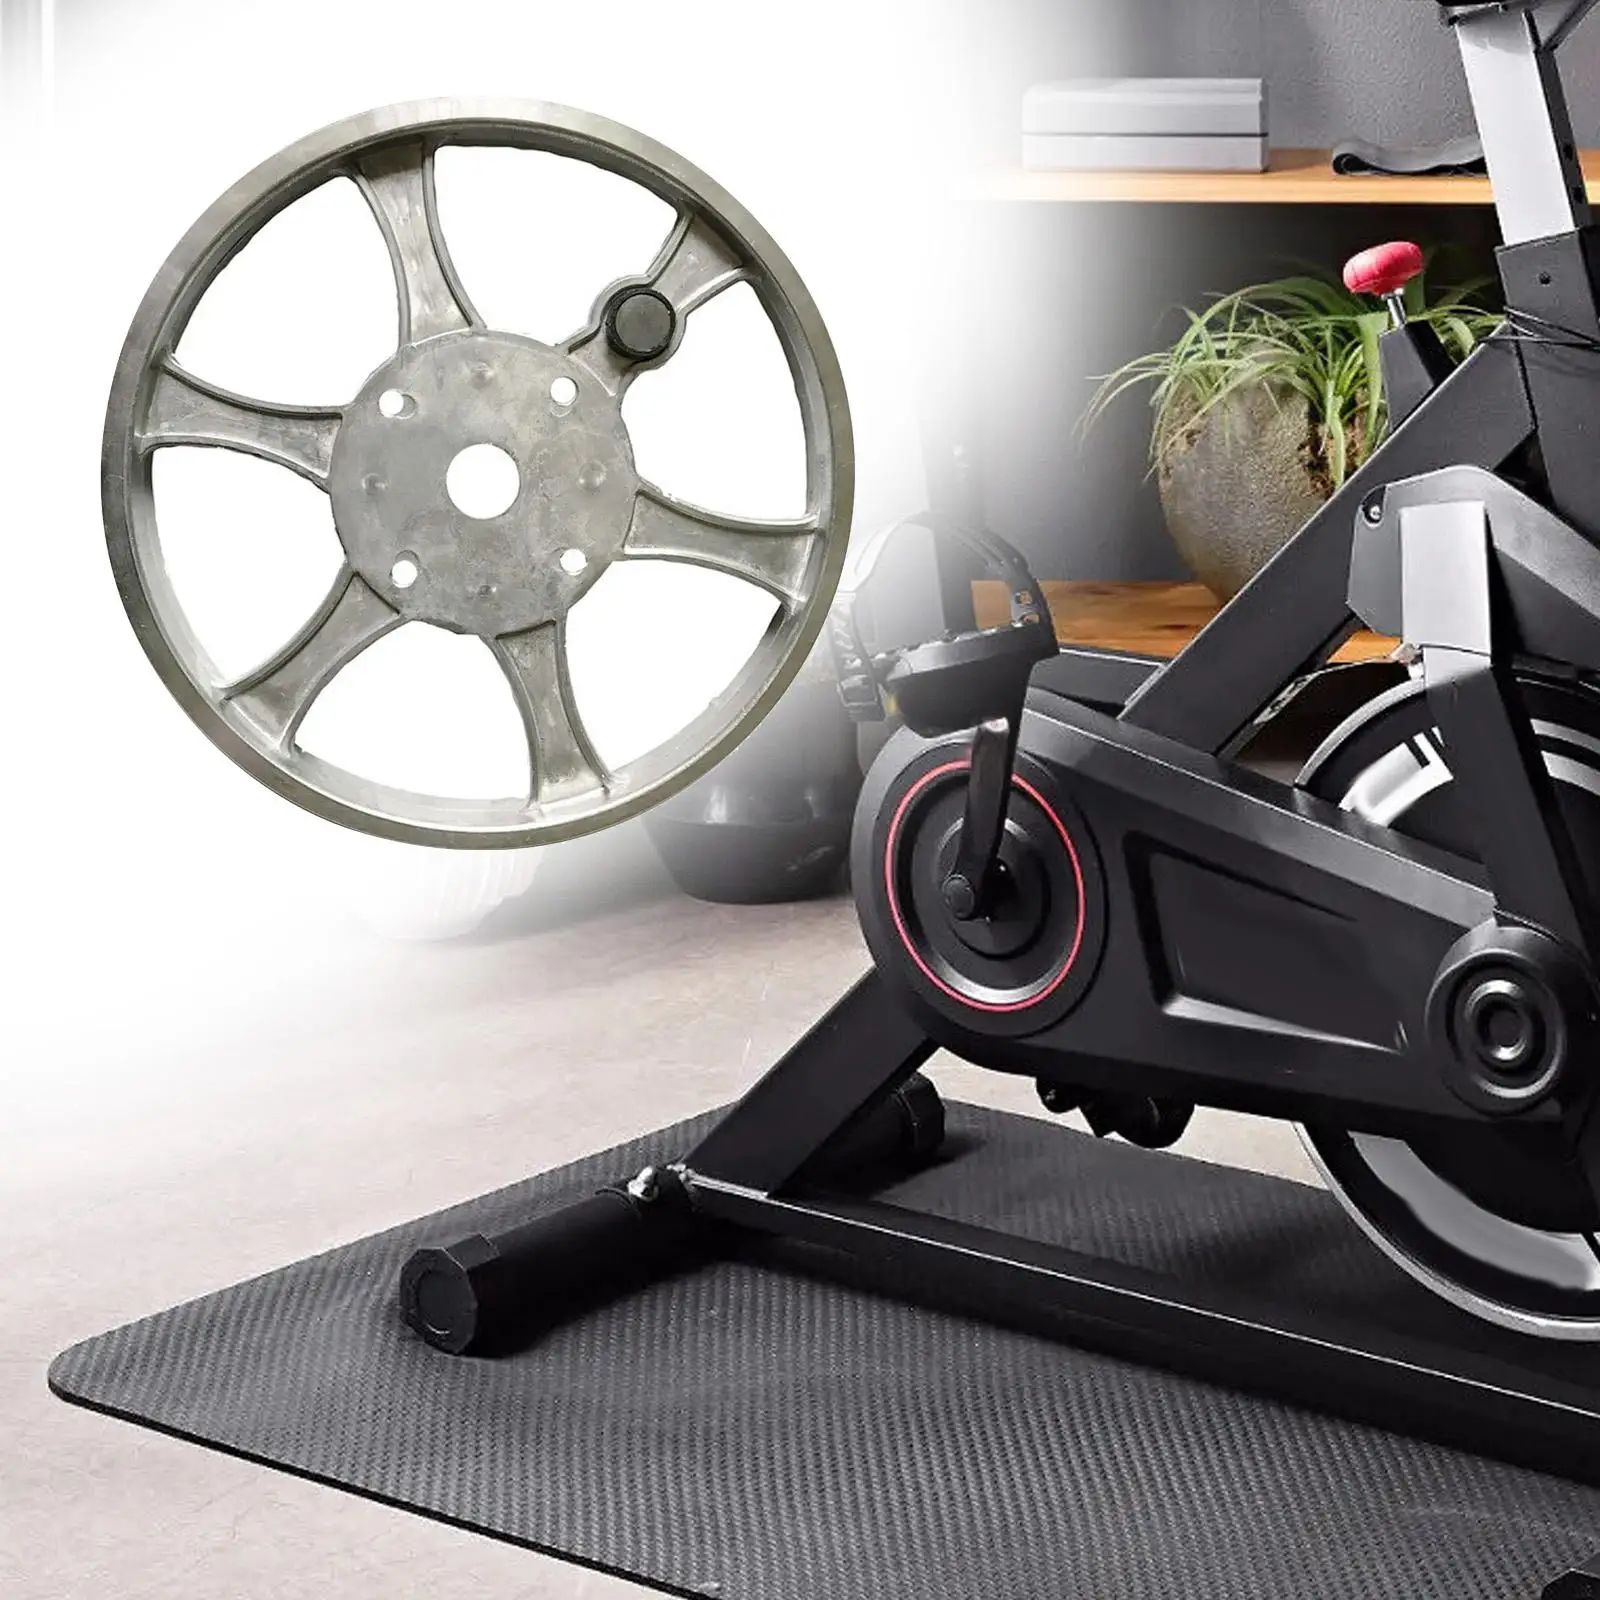 Exercise Bike Drive Disc Easy to Install Aluminum Alloy Indoor Stationary Bike Transmission Disc Accessories for Home Gym Cycle